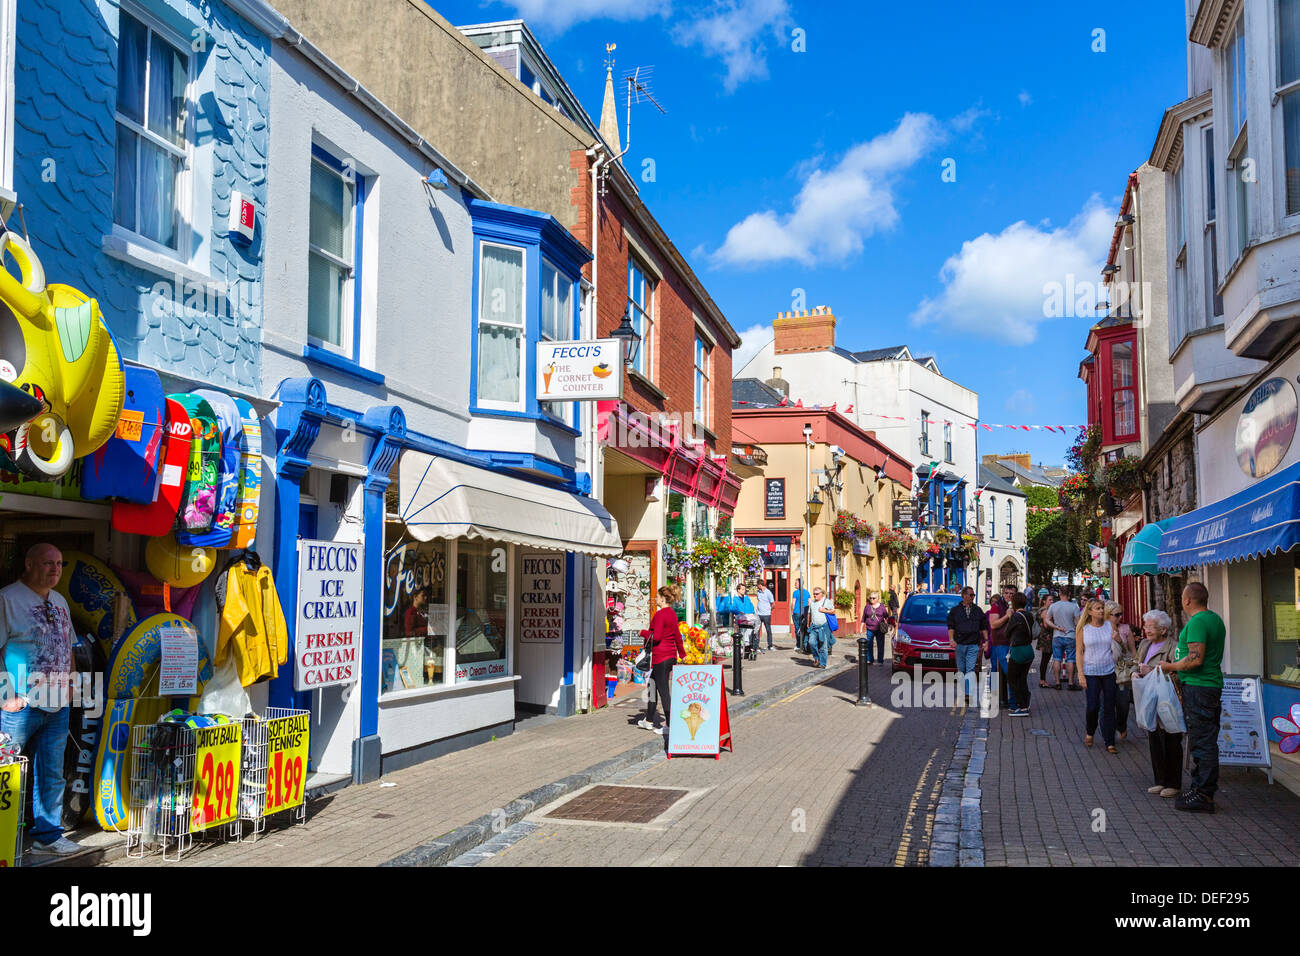 Shops on St George's Street in the town centre, Tenby, Pembrokeshire, Wales, UK Stock Photo